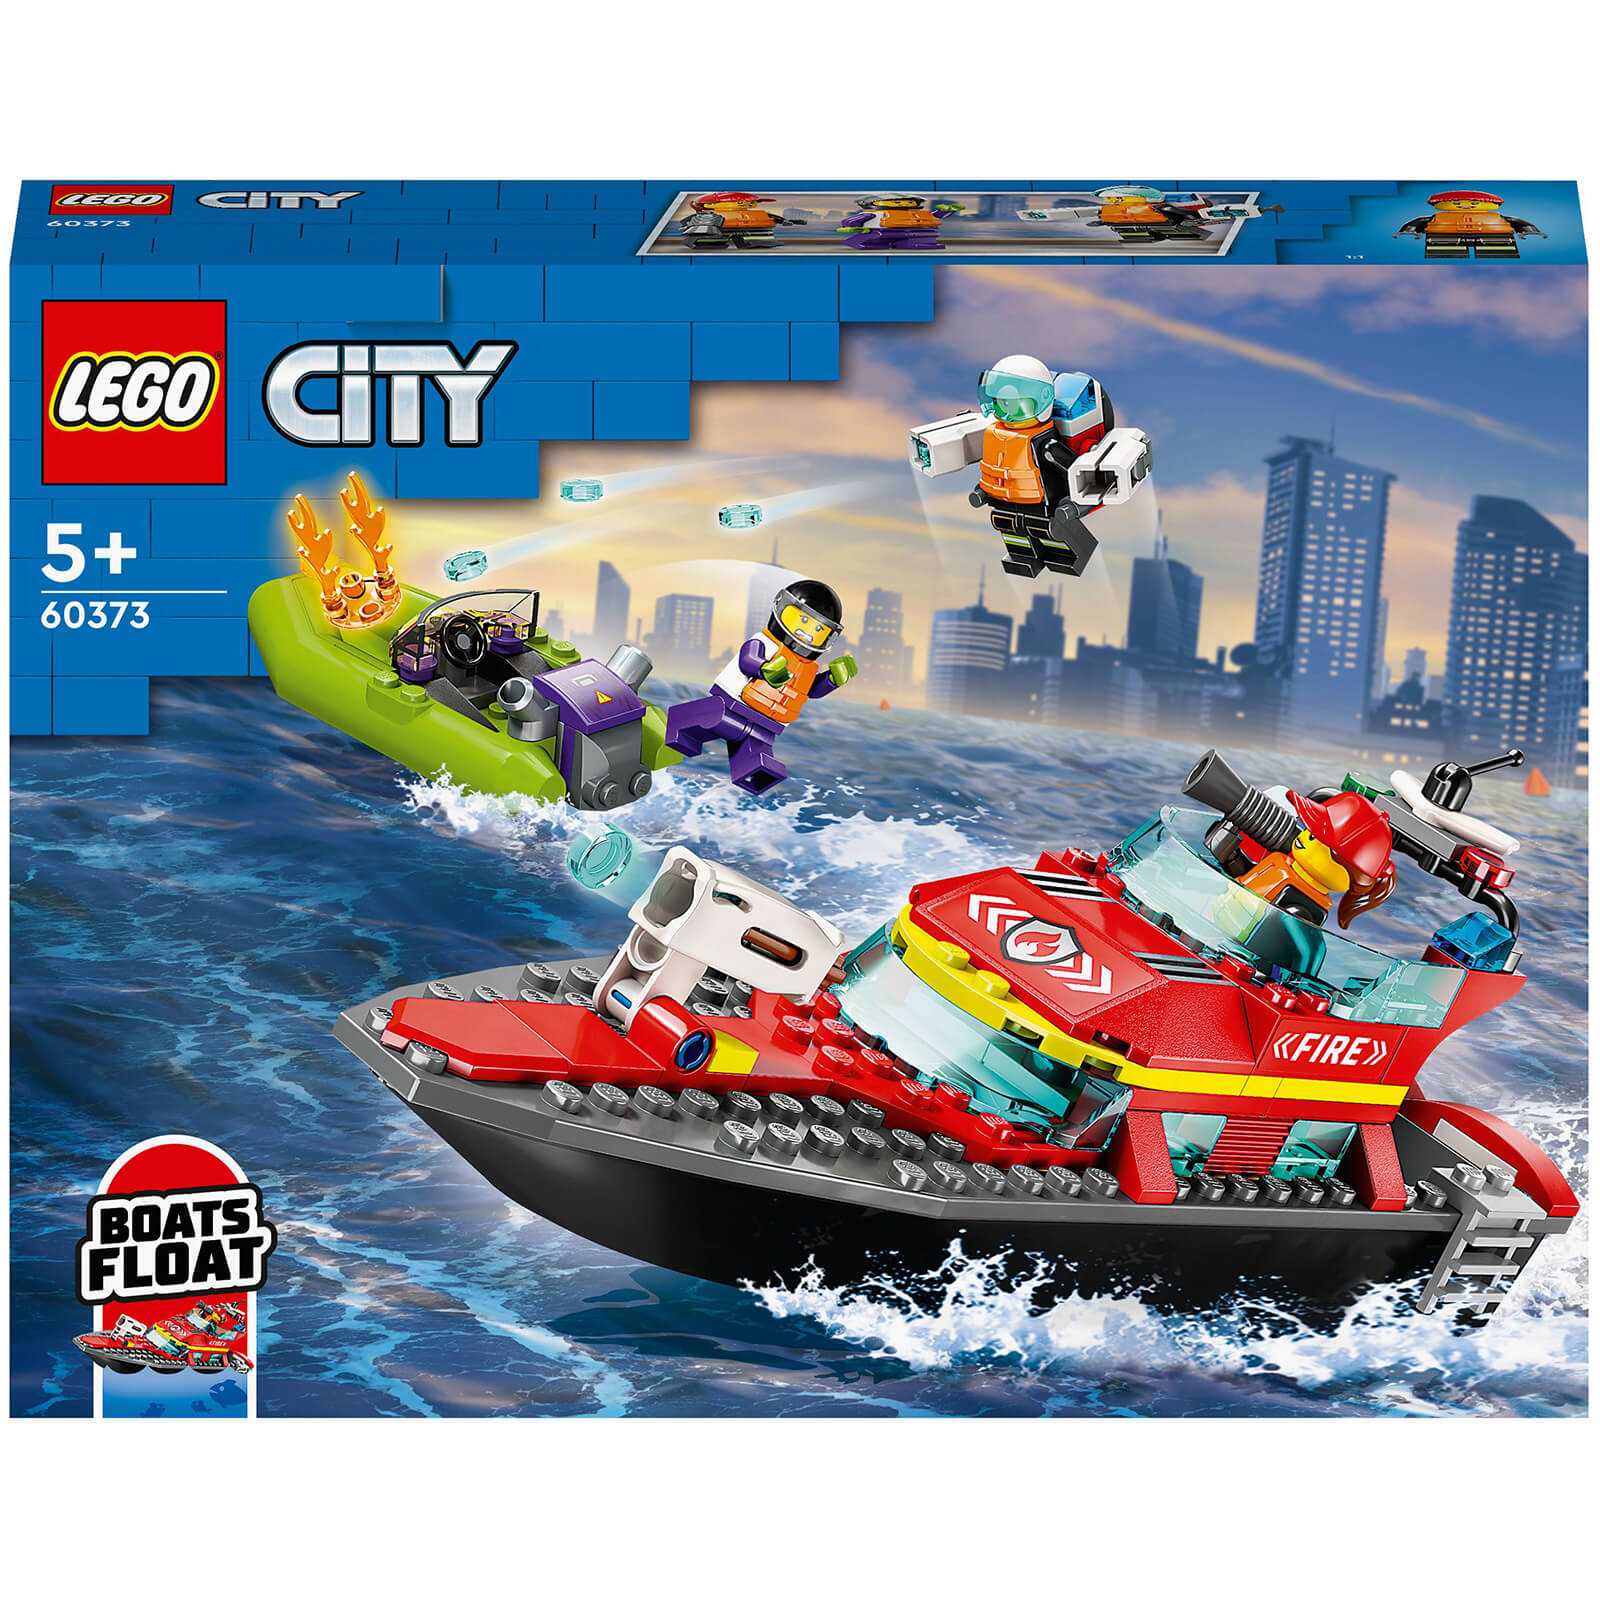 LEGO City: Fire Rescue Boat Toy, Floats on Water Set (60373)